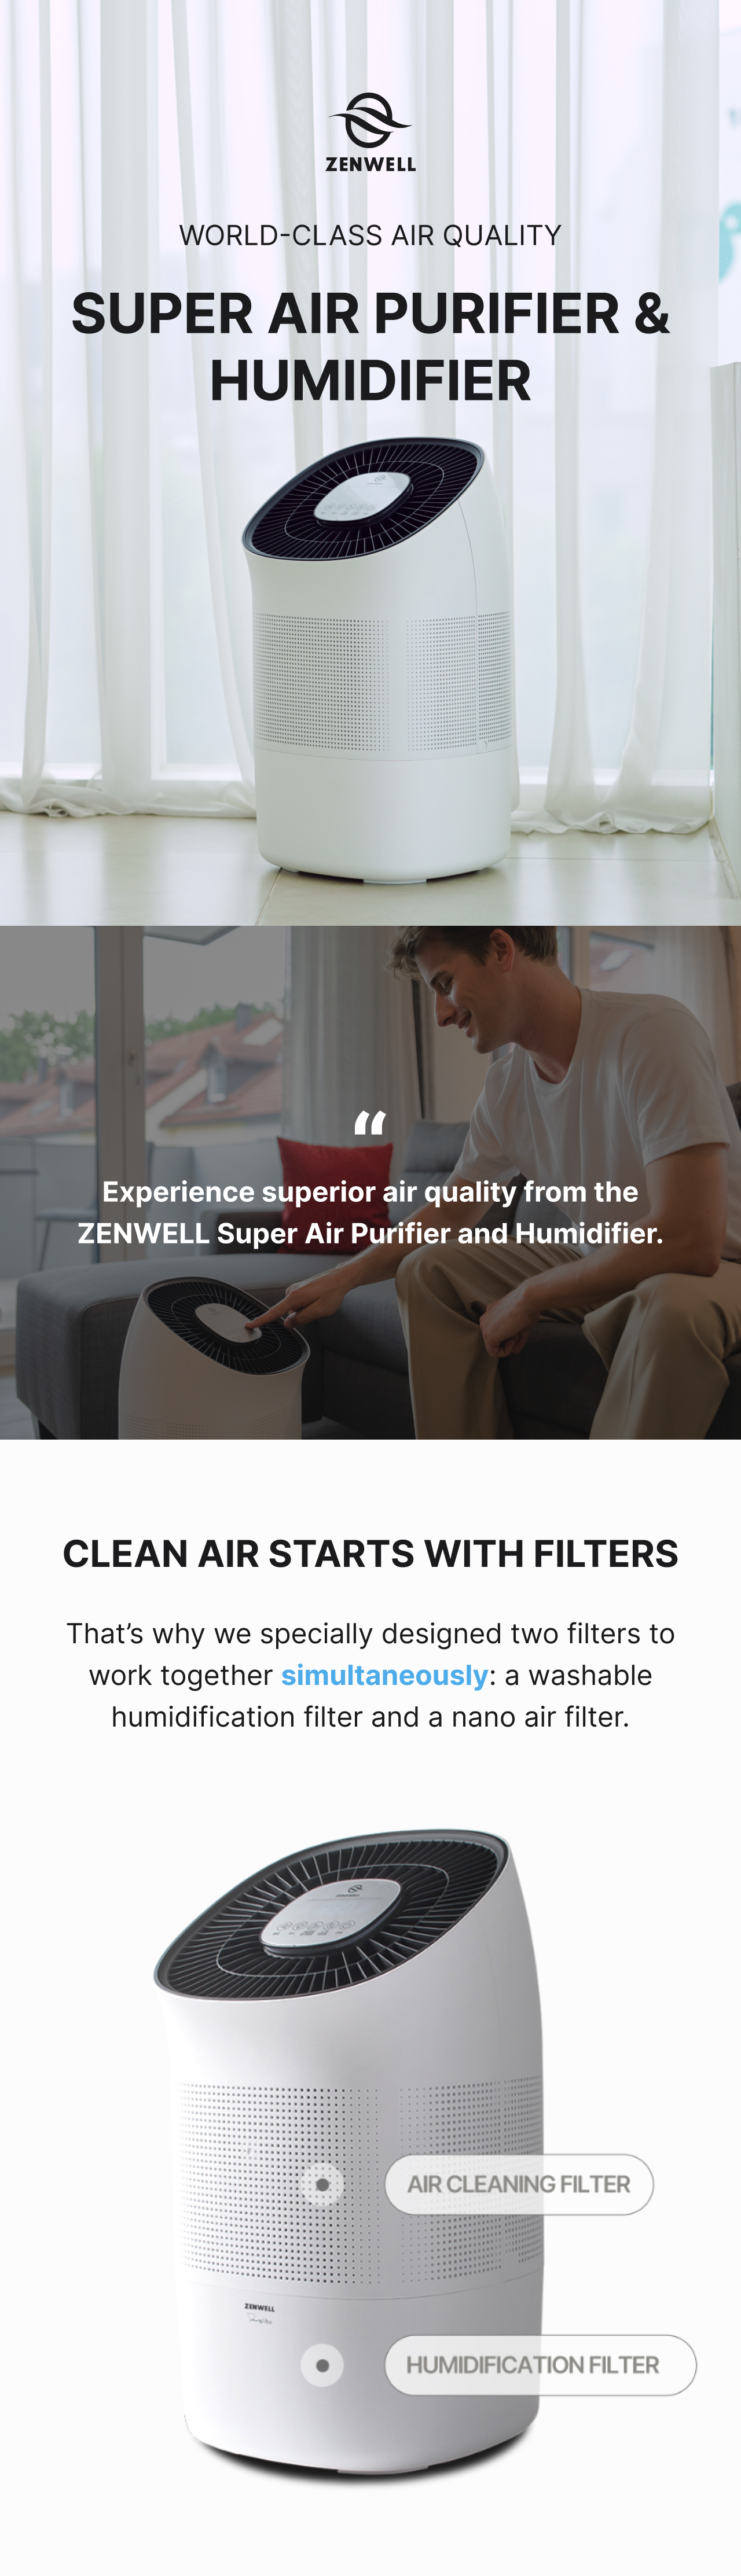 Super Air Purifier and Humidifier product description image explaining how it has two filters that work together simultaneously: a washable humidification filter and a nano air filter.